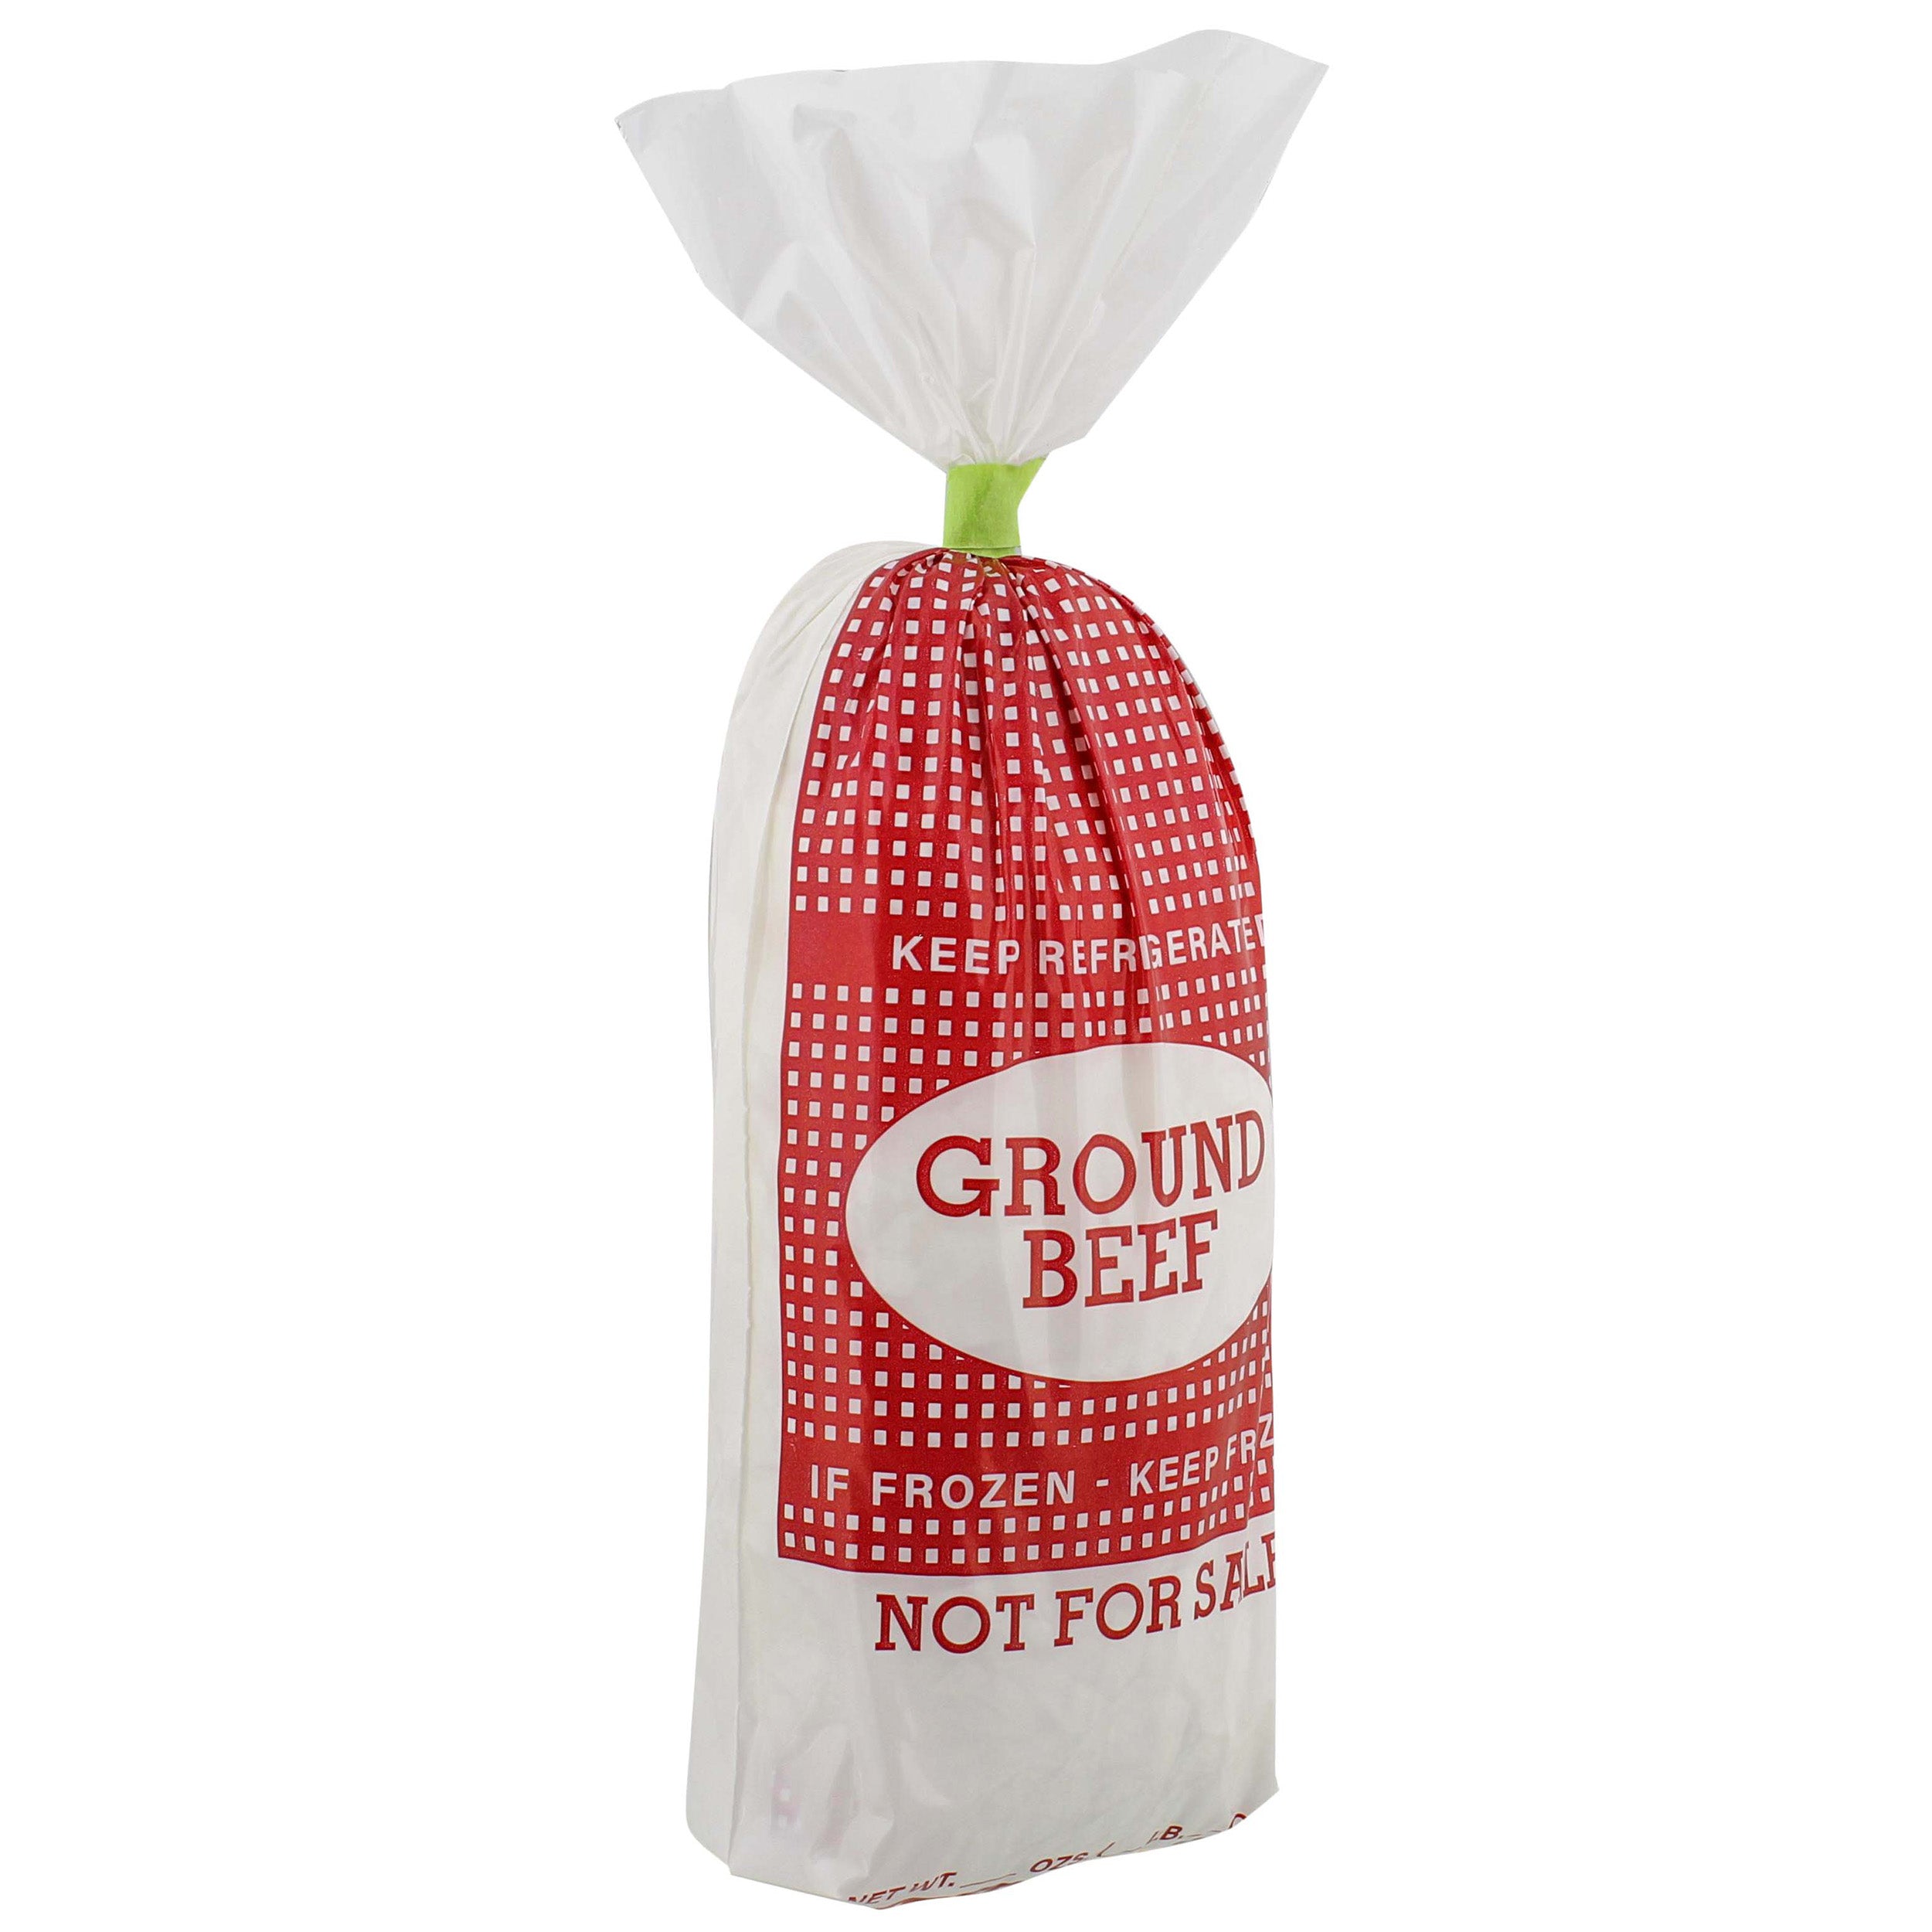 Lot45 Ground Hamburger Bags 1lb - 1000pk Clear Wild Game Meat Processing  Bags